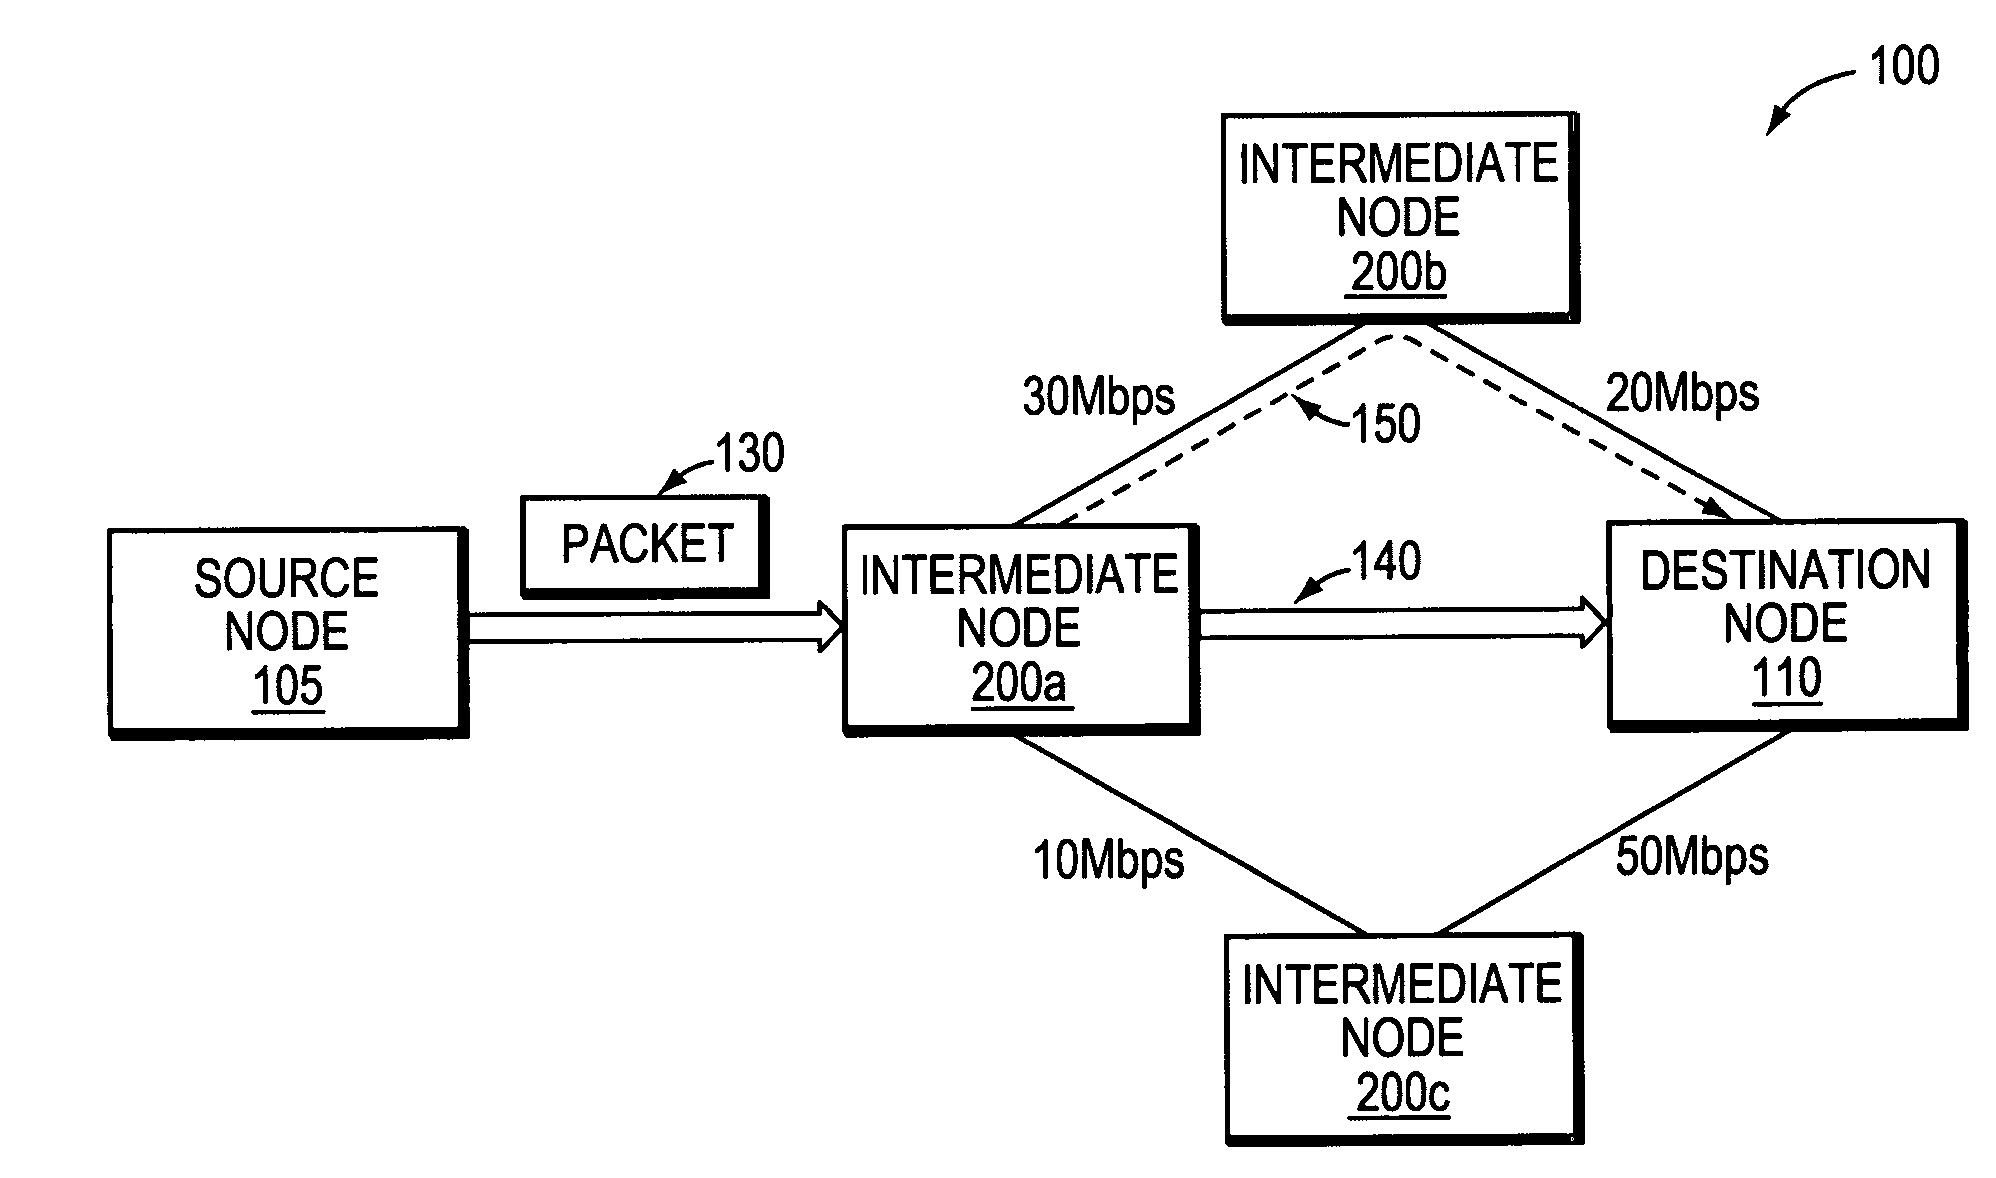 Method and apparatus to compute local repair paths taking into account link resources and attributes